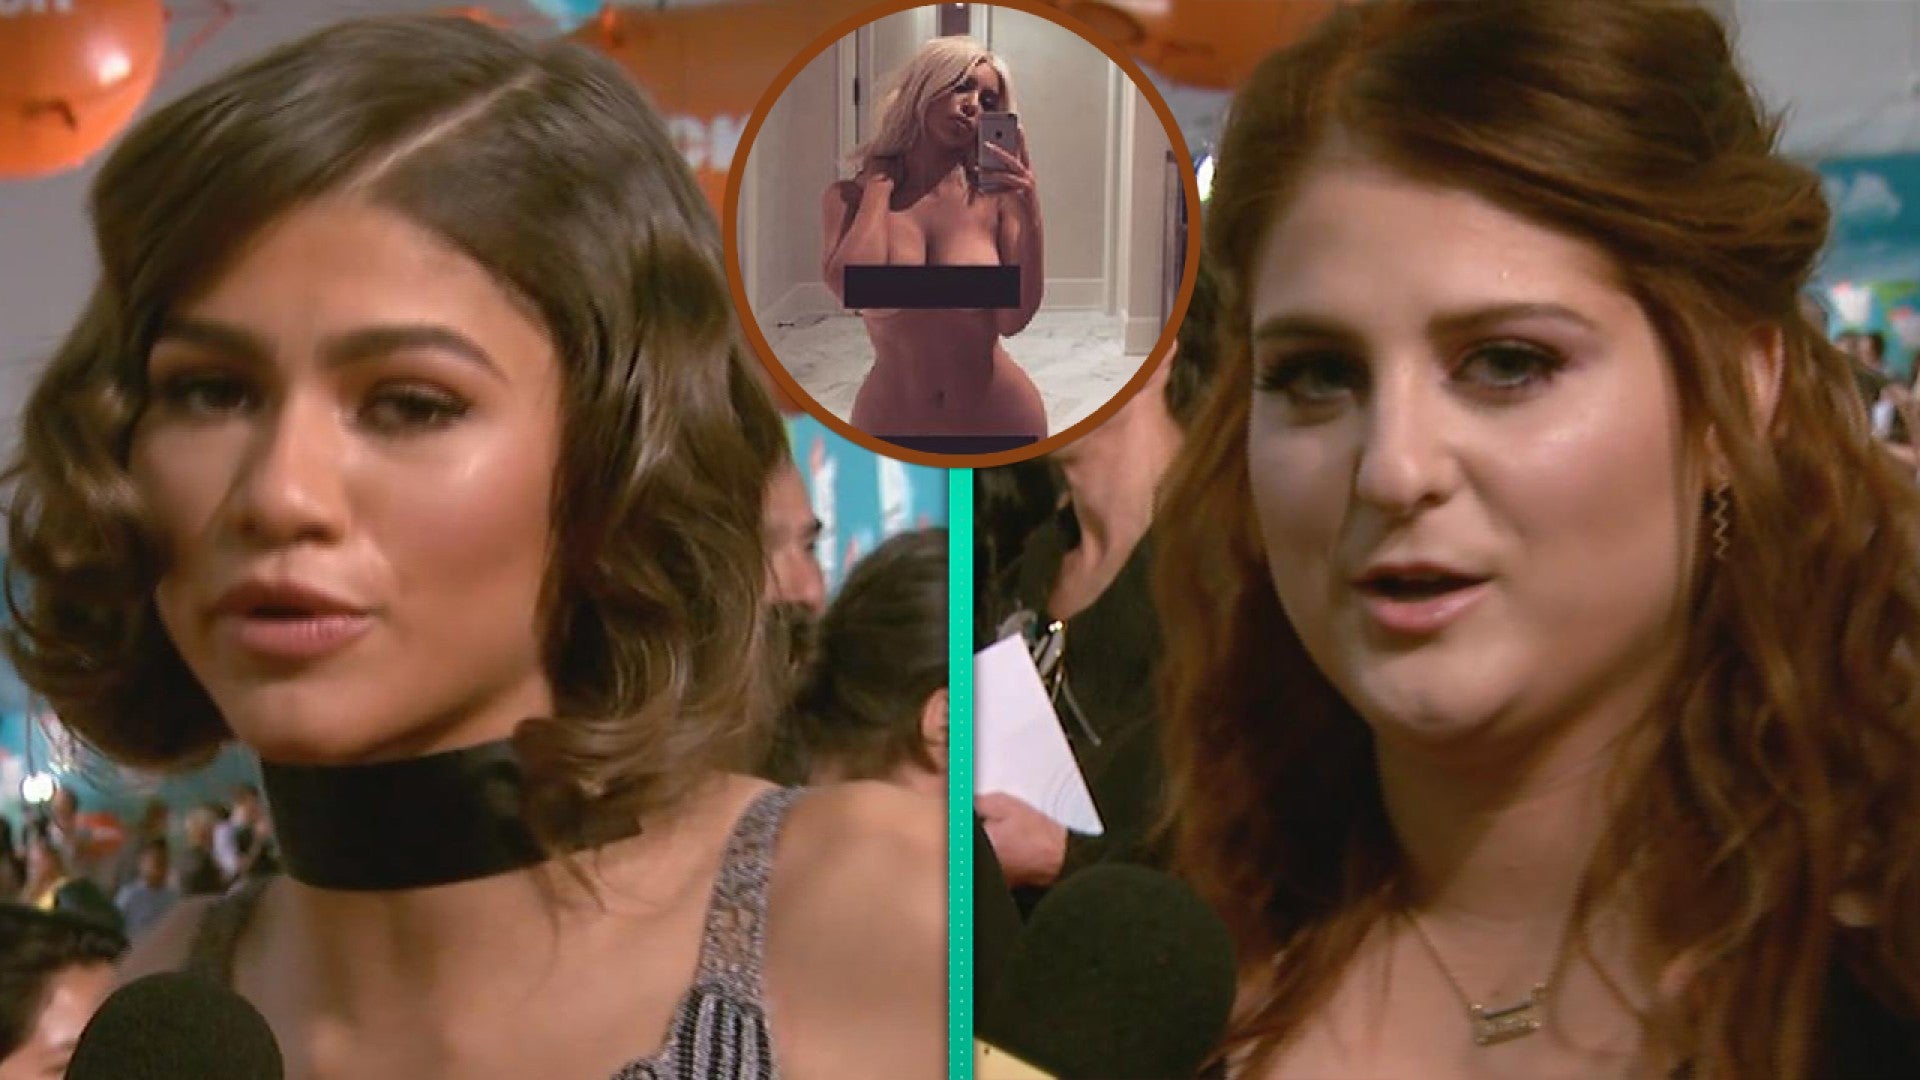 Of meghan trainor naked pictures 26 Absurdly